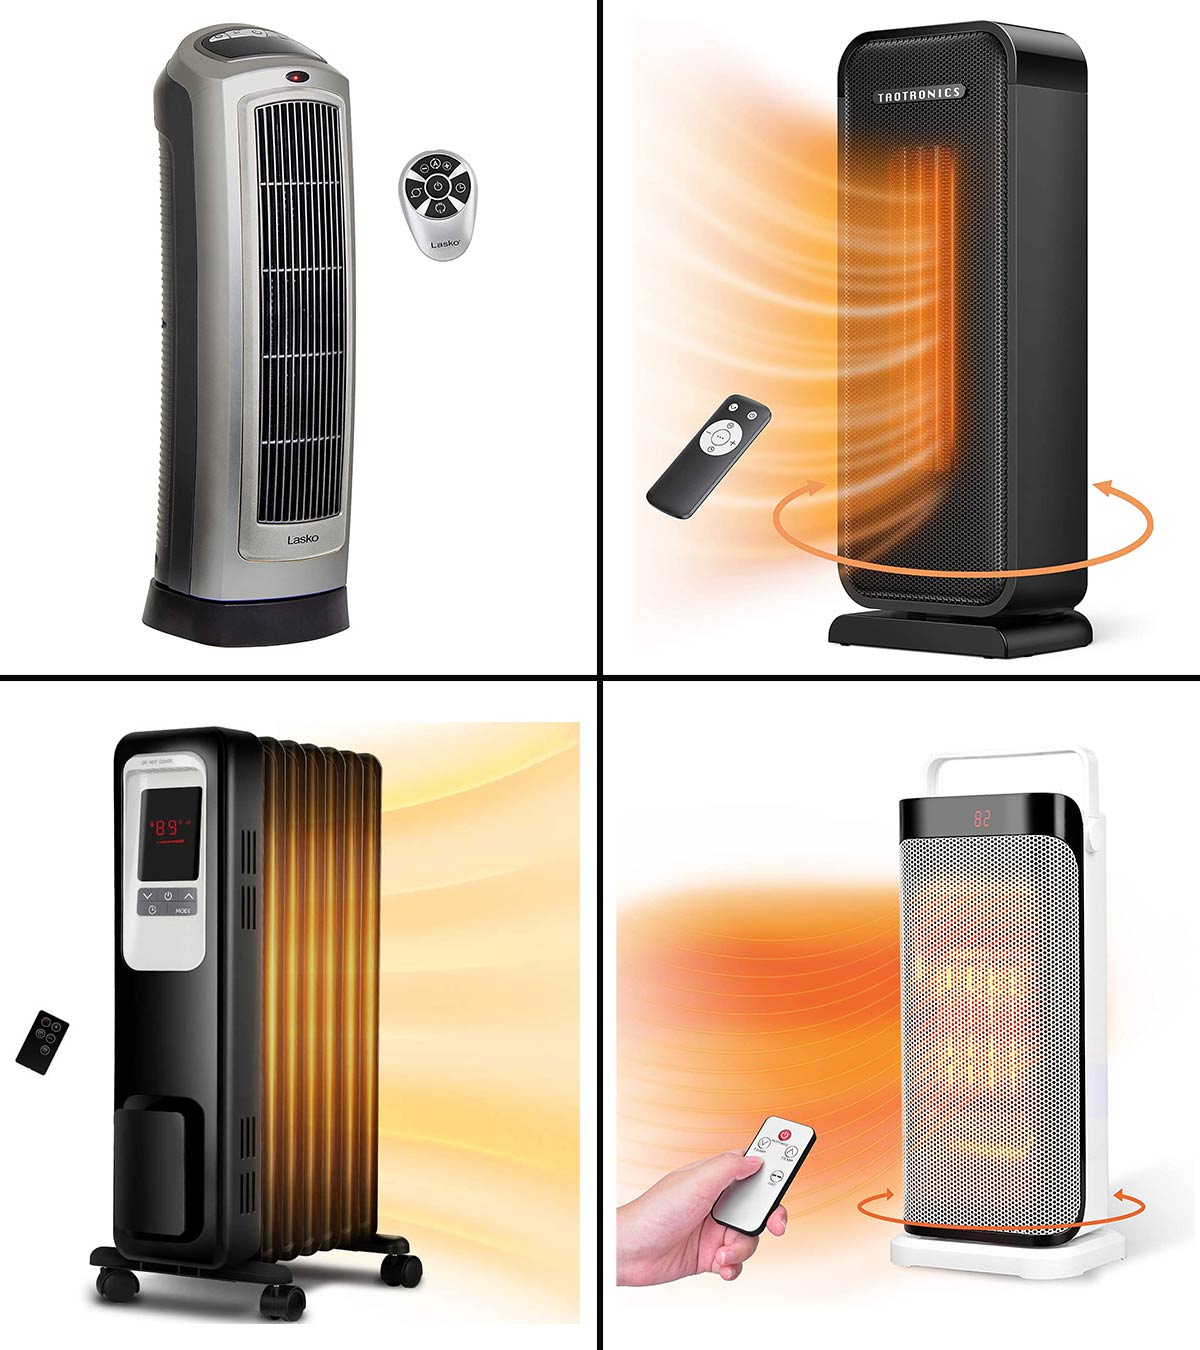 Using Portable Space Heaters: Keeping Safe & Warm